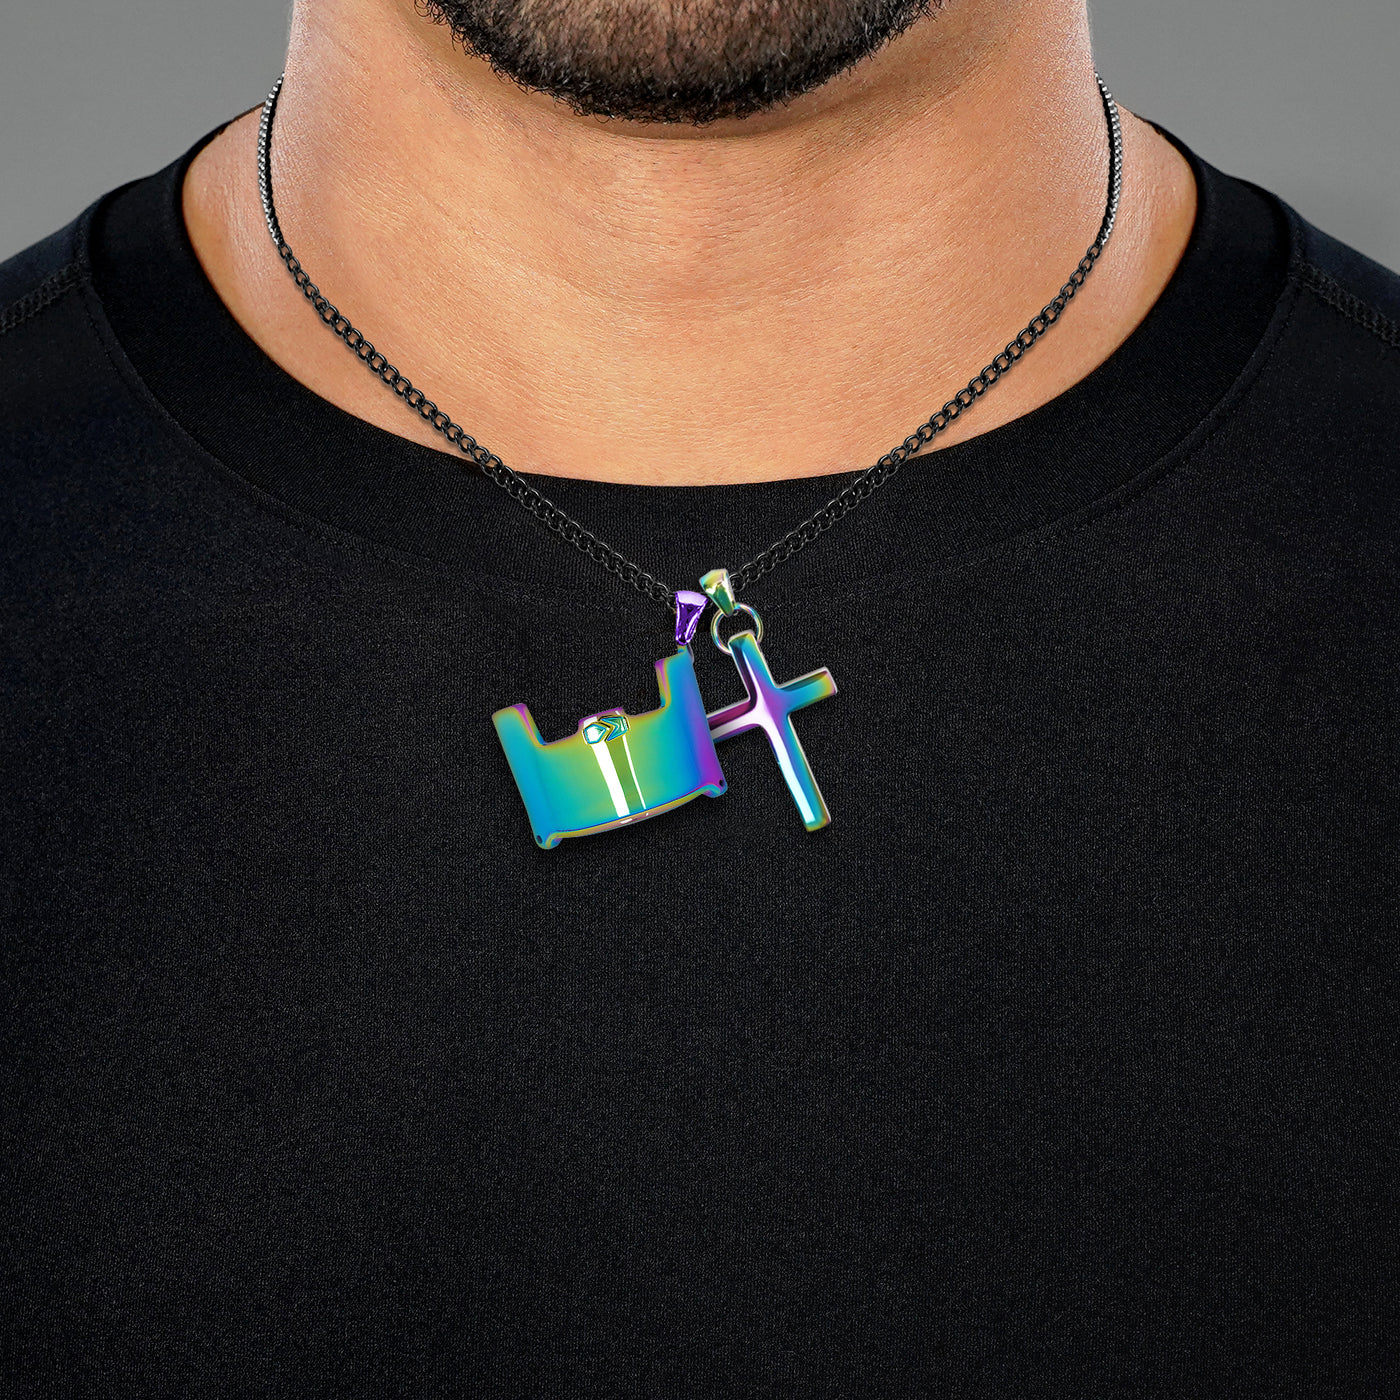 Visor & Cross Pendant with Chain Necklace - Borealis Stainless Steel